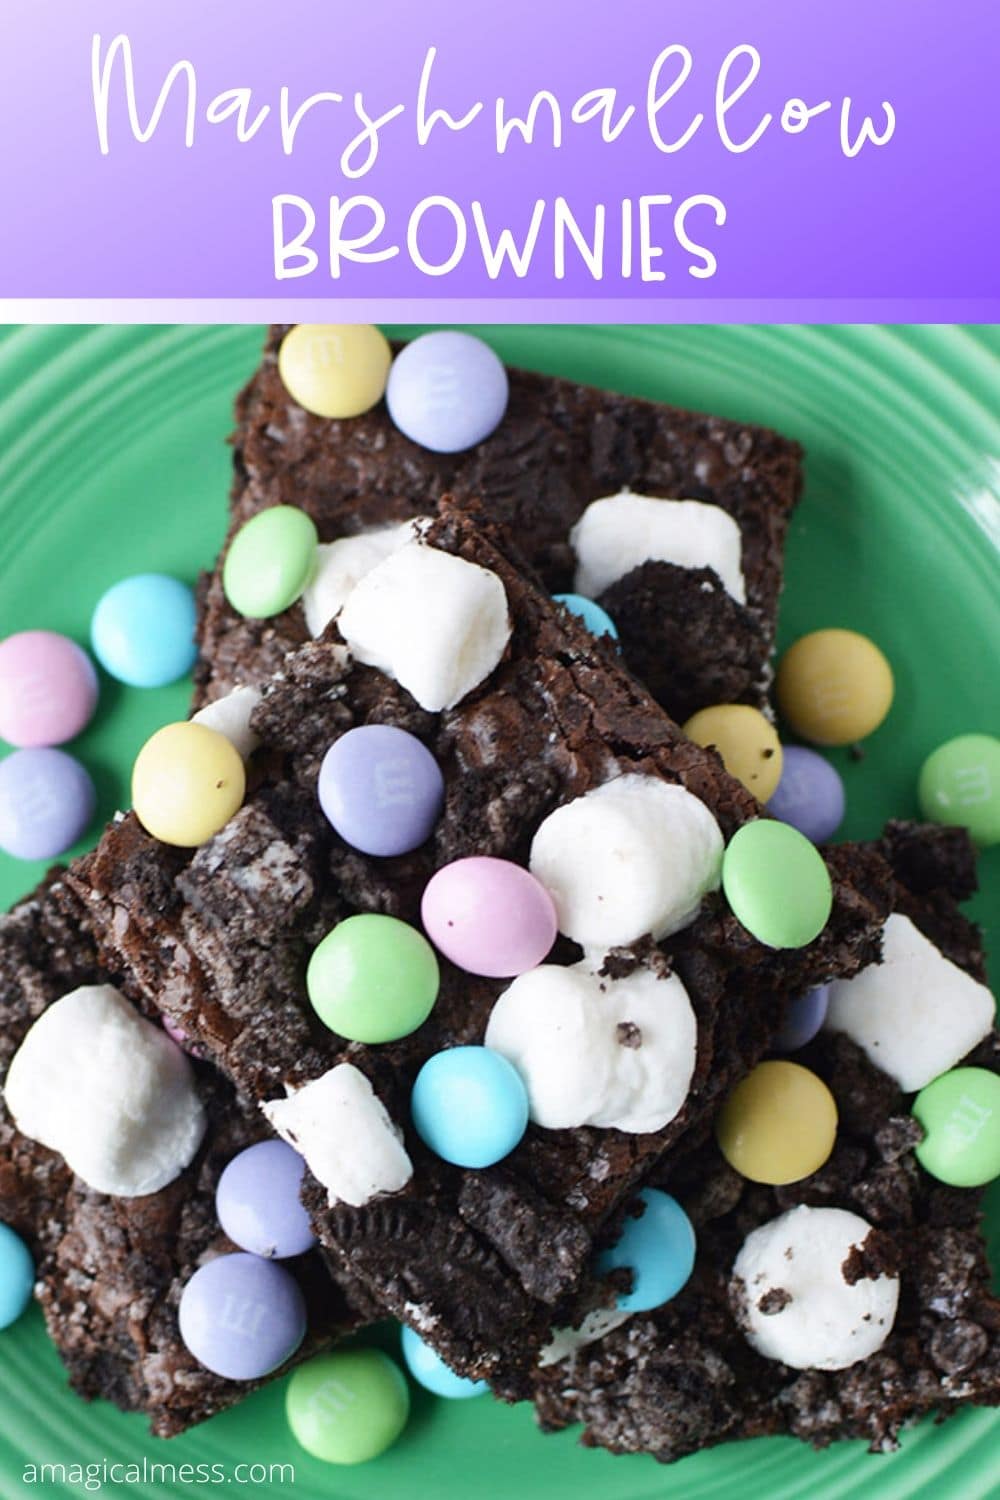 Marshmallow Oreo brownies on a plate